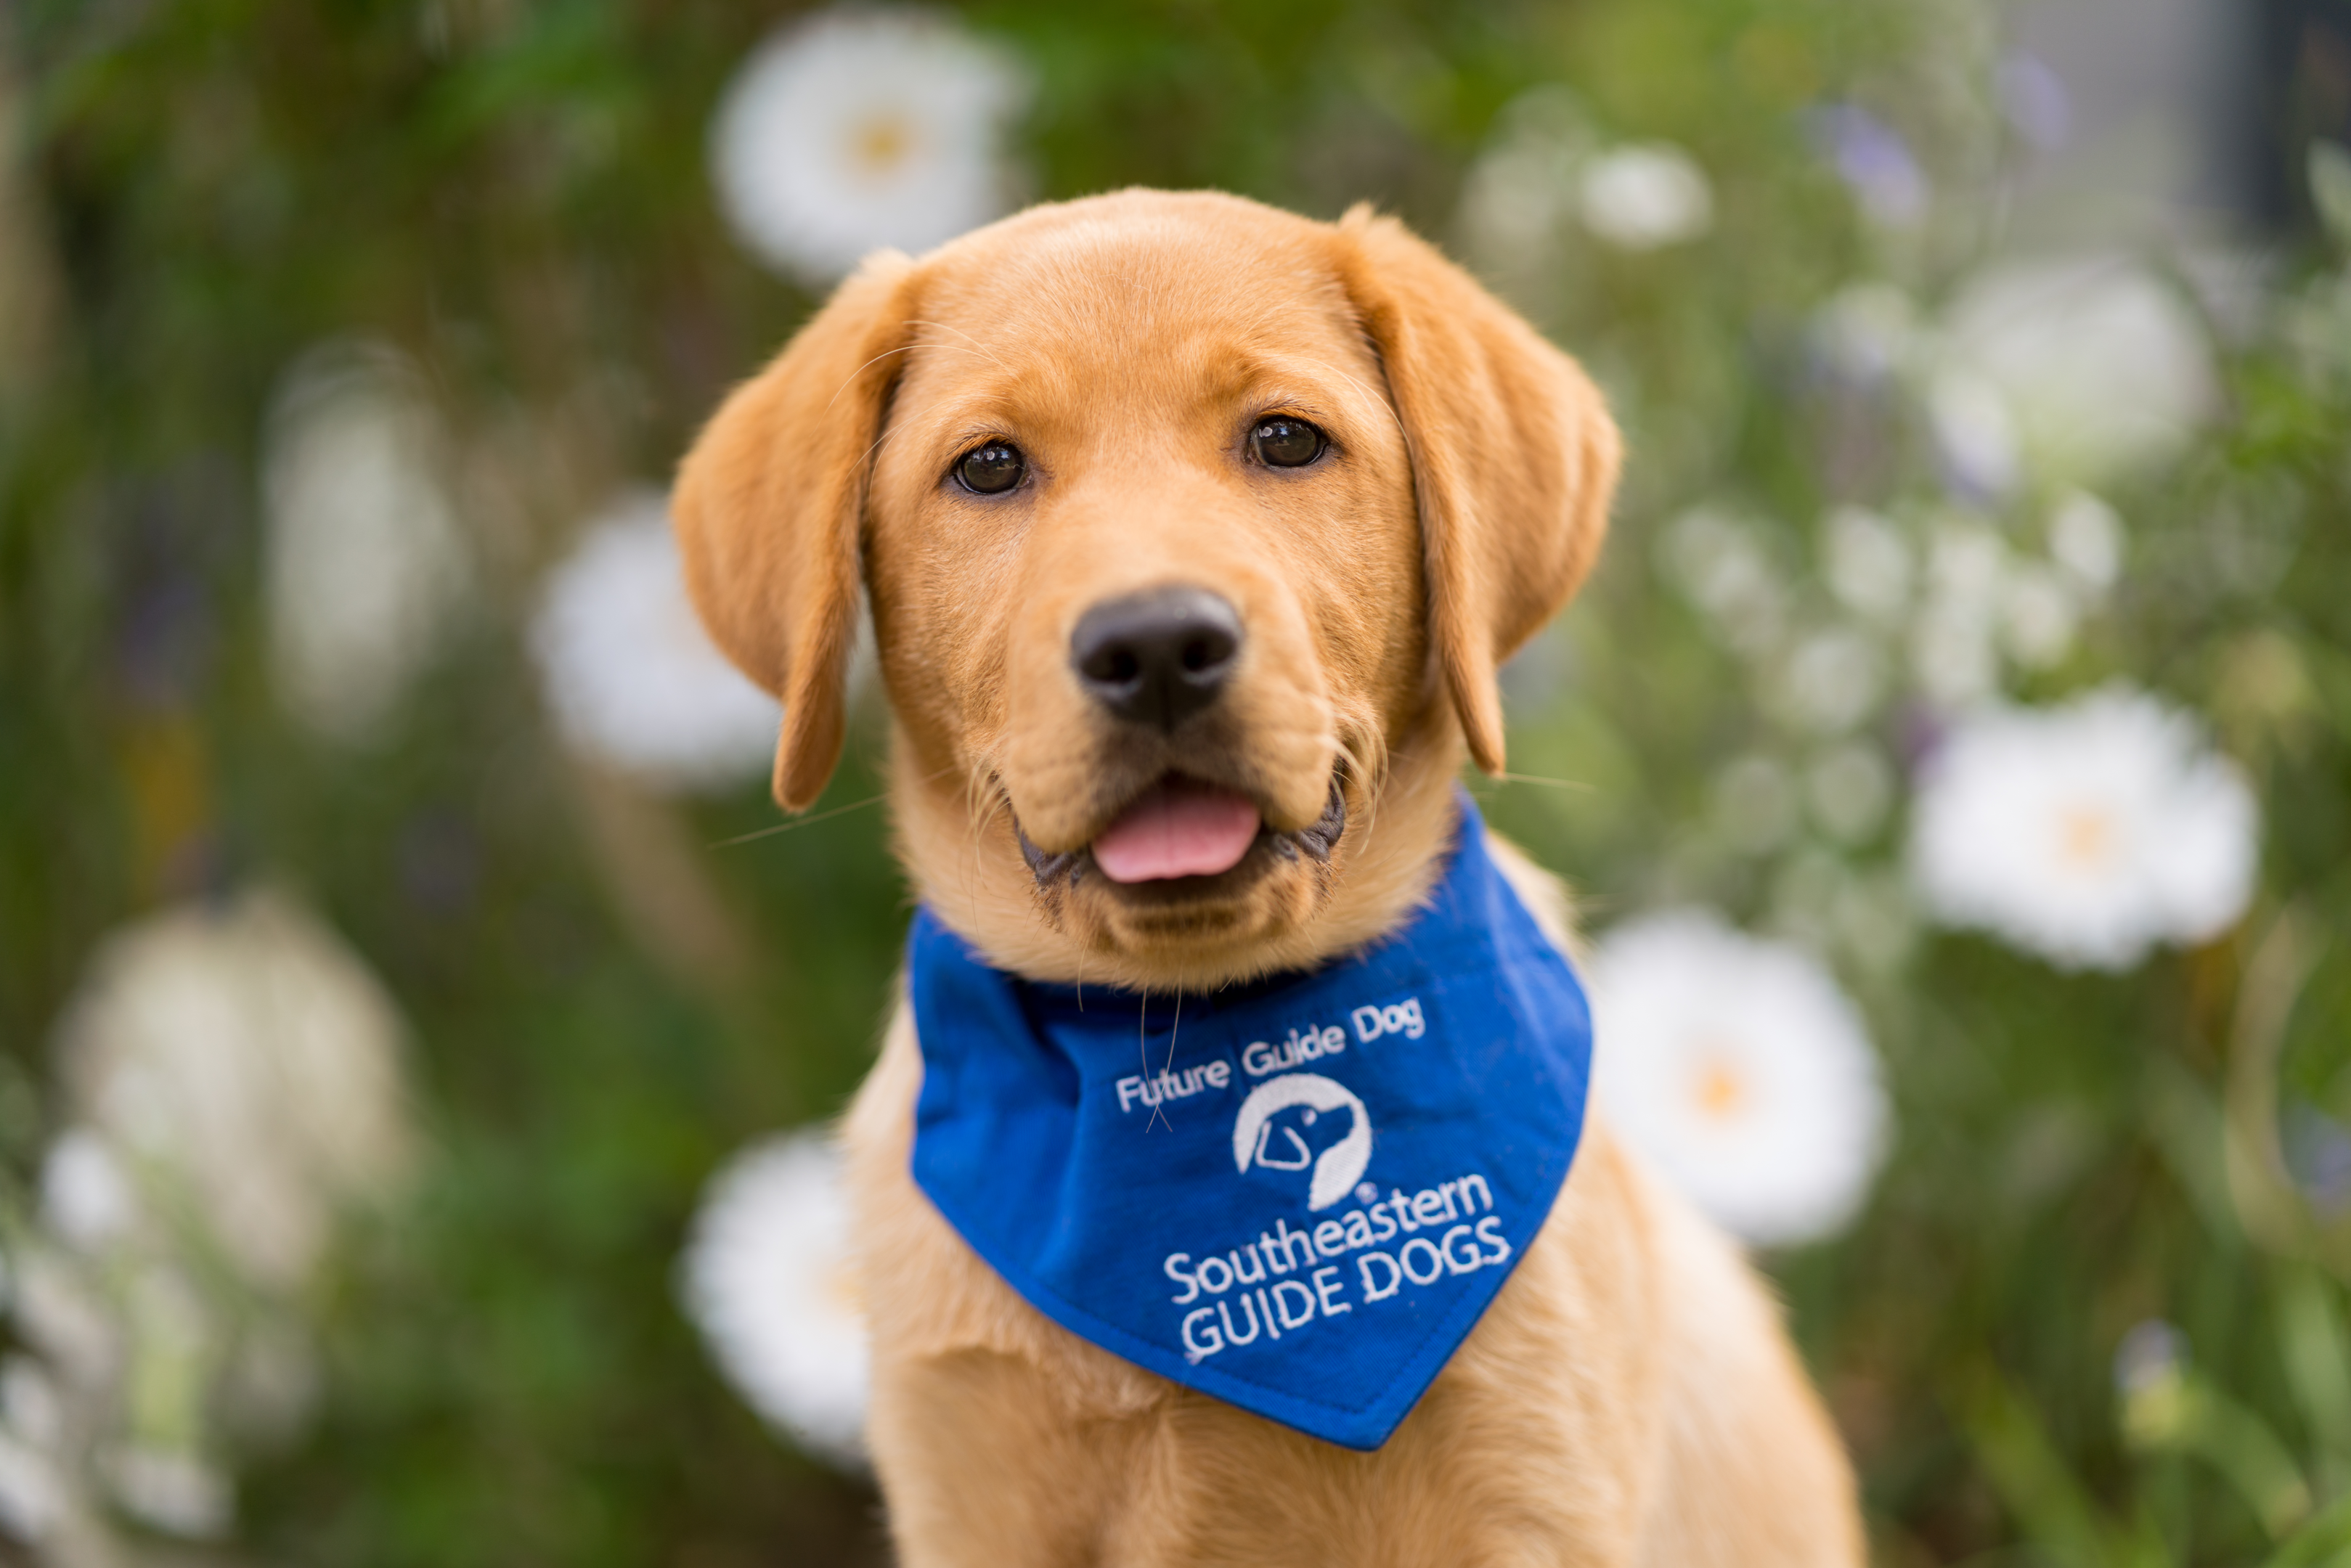 A yellow Labrador puppy with a blue Future Guide Dog bandana around the puppy's neck.